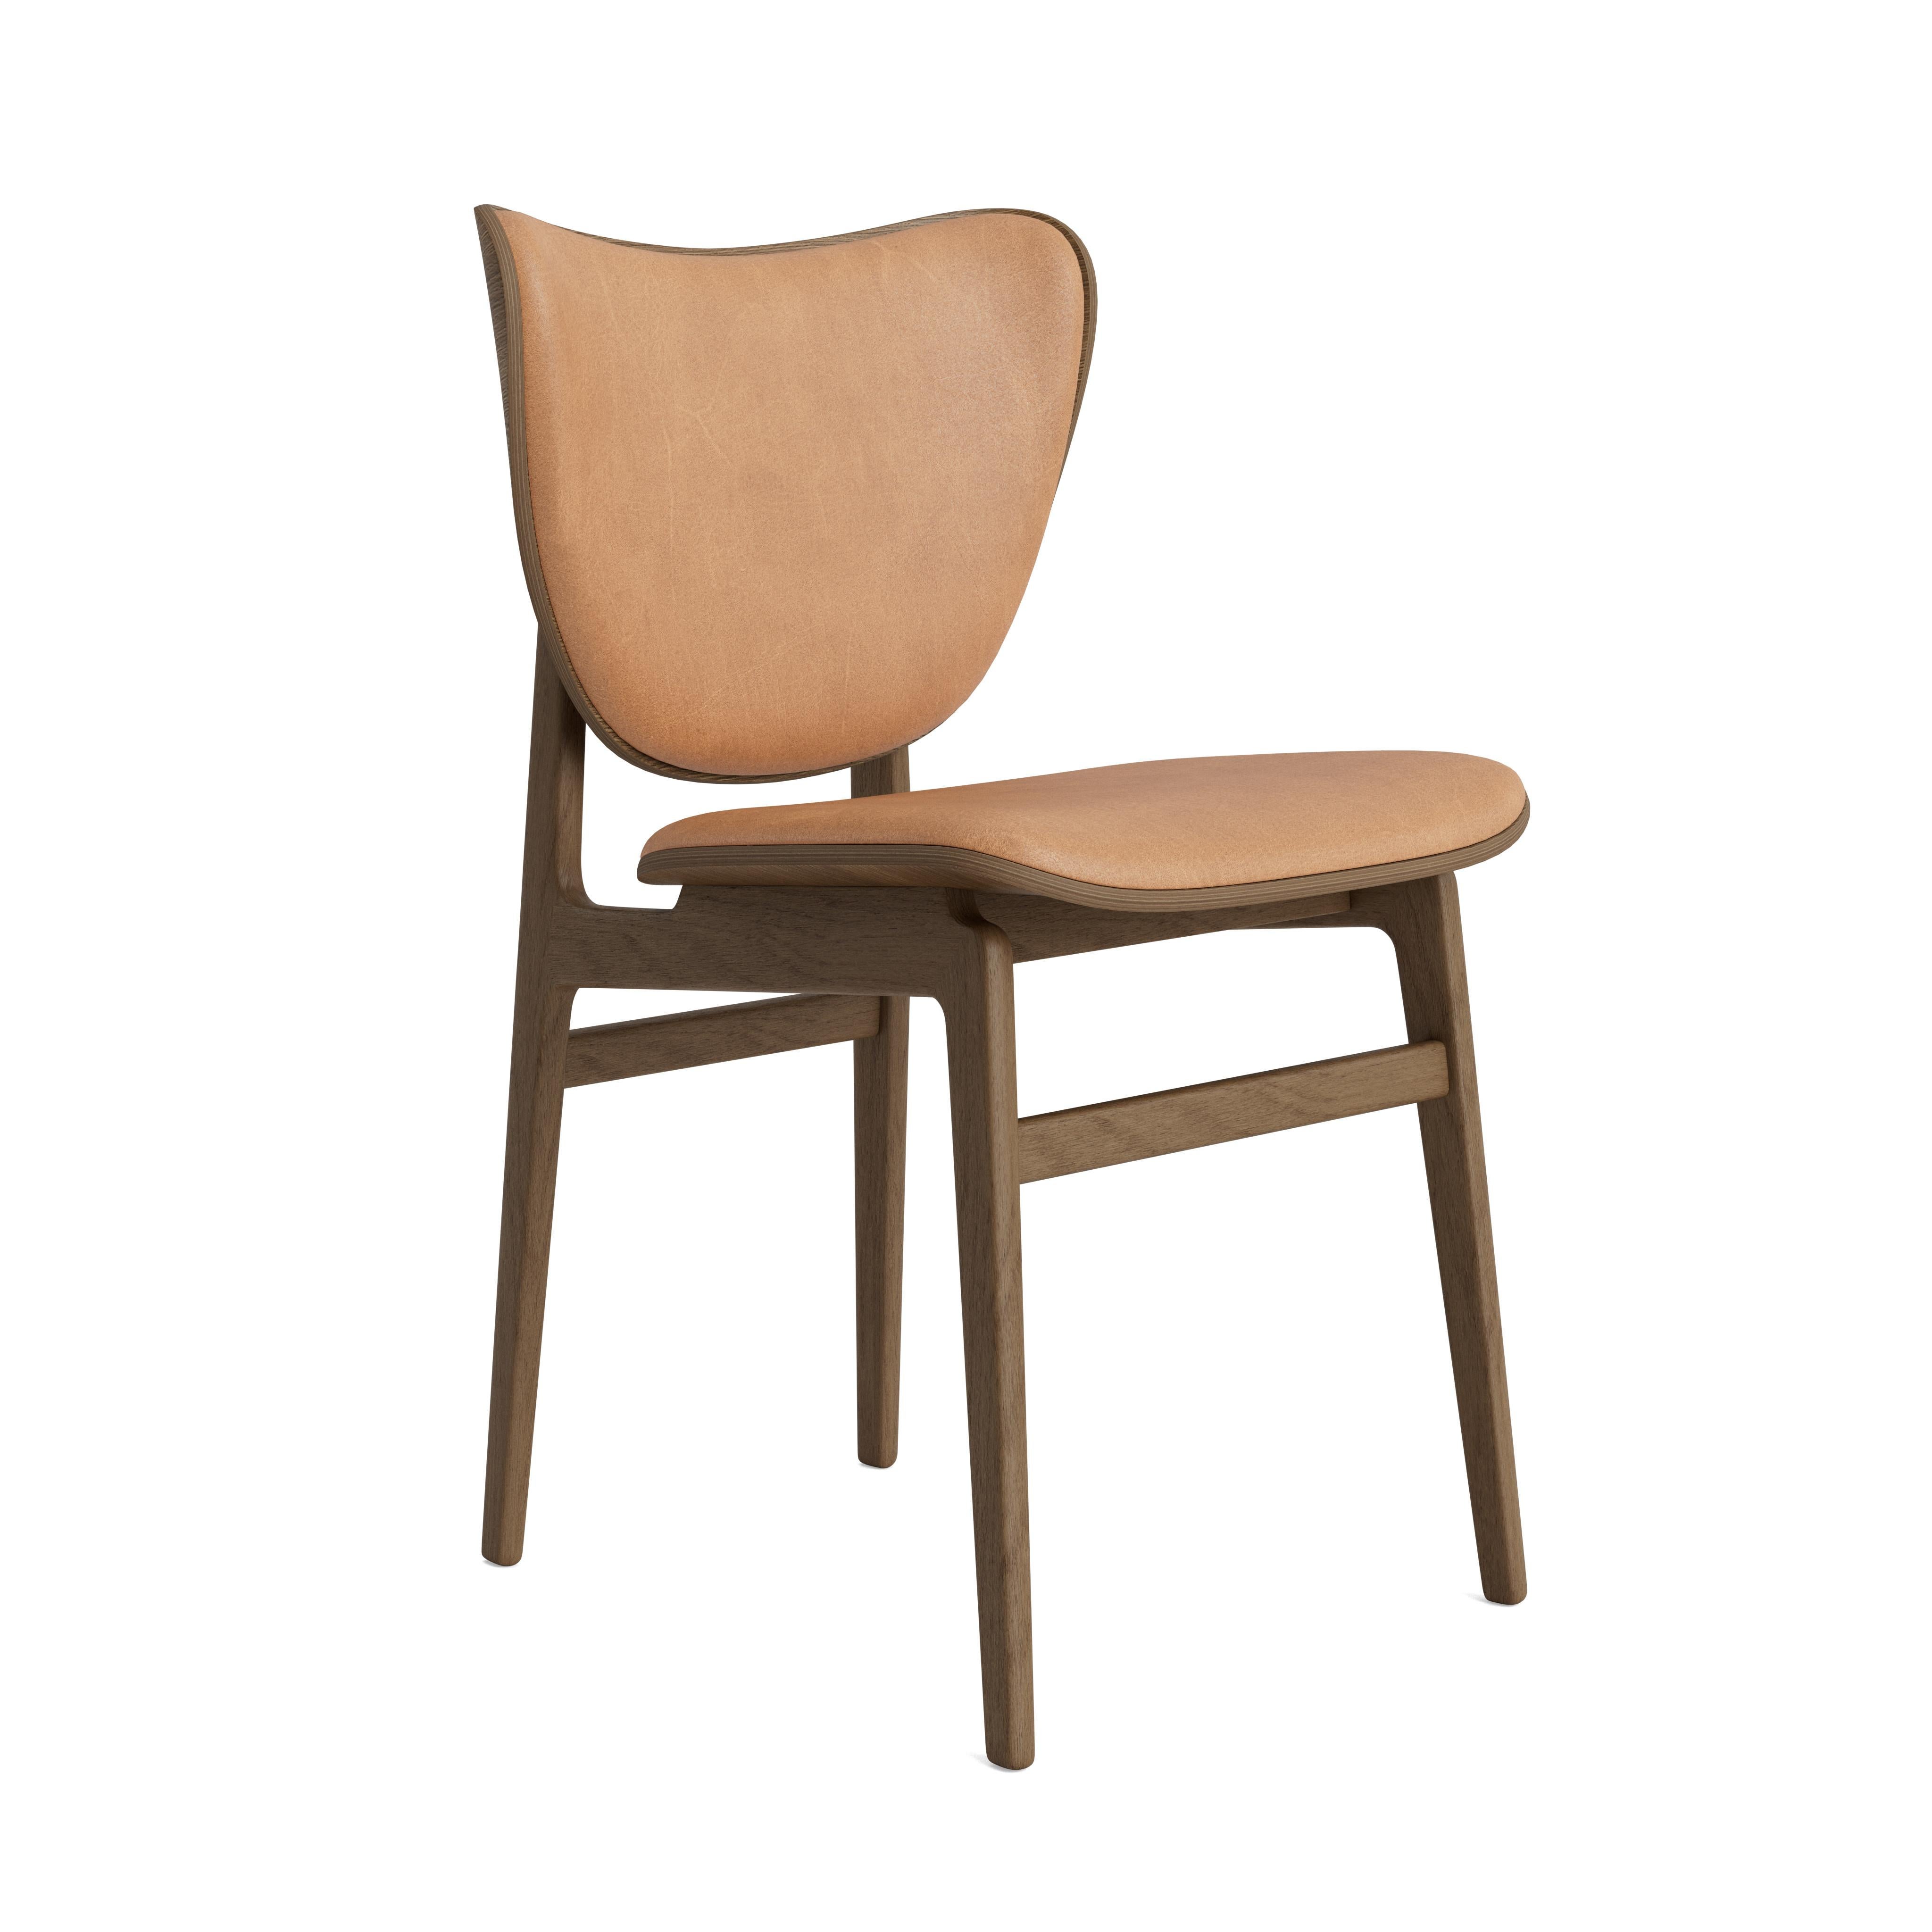 Elephant Dining Chair by NORR11
Dimensions: D 51 x W 47 x H 80,5 cm. SH 45,5 cm.
Materials: Light smoked oak and upholstery.
Upholstery: Dunes Camel 21004.

Available in different oak finishes: Natural oak, light smoked oak, dark smoked oak, black